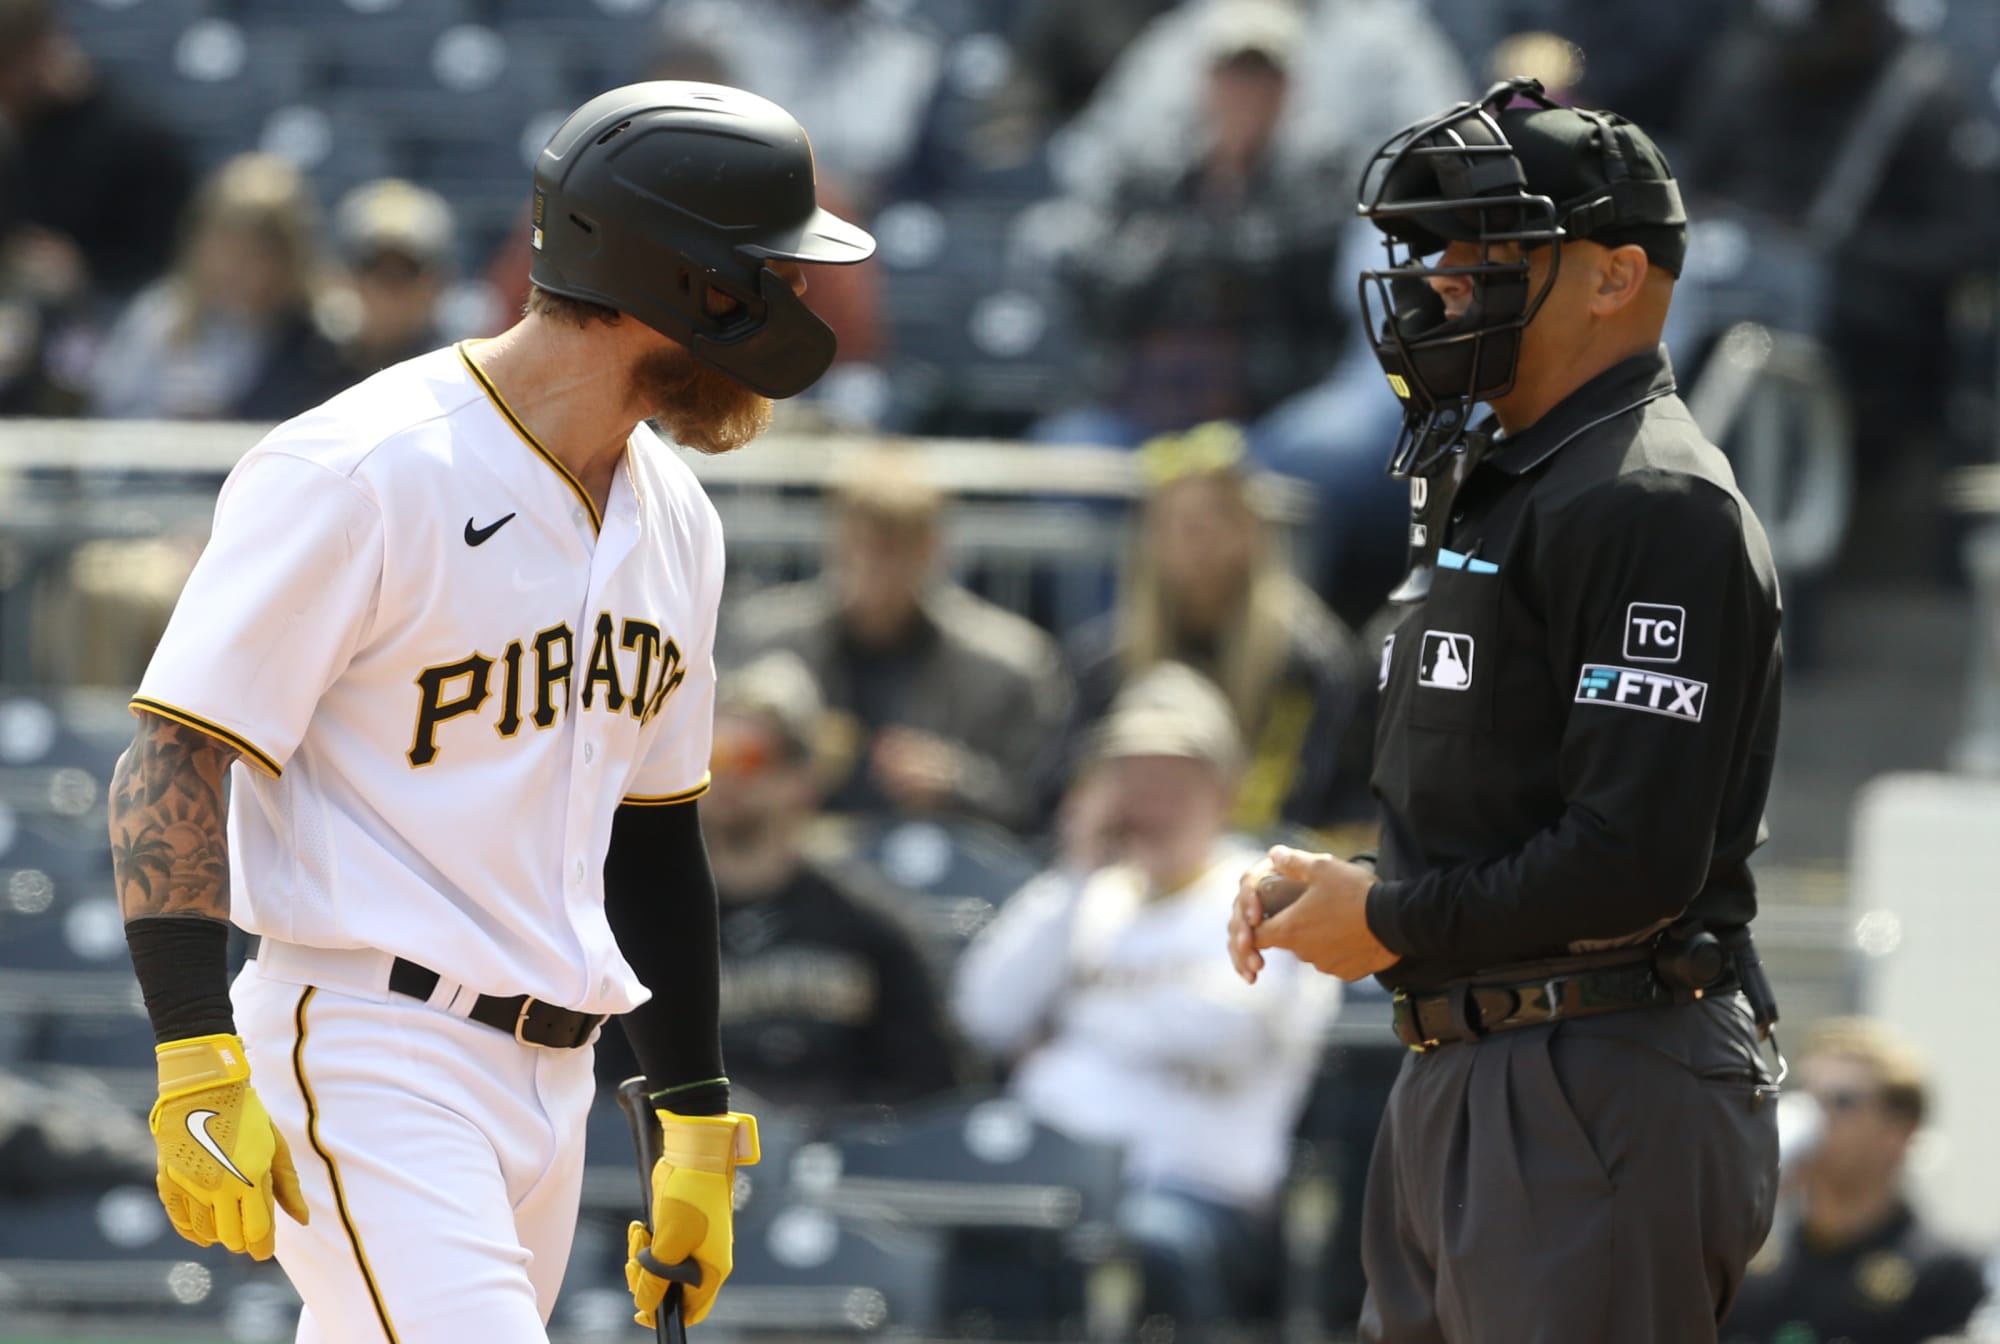 Pittsburgh Pirates Lose In Heartbreaking Fashion To Andrew McCutchen And The Brewers